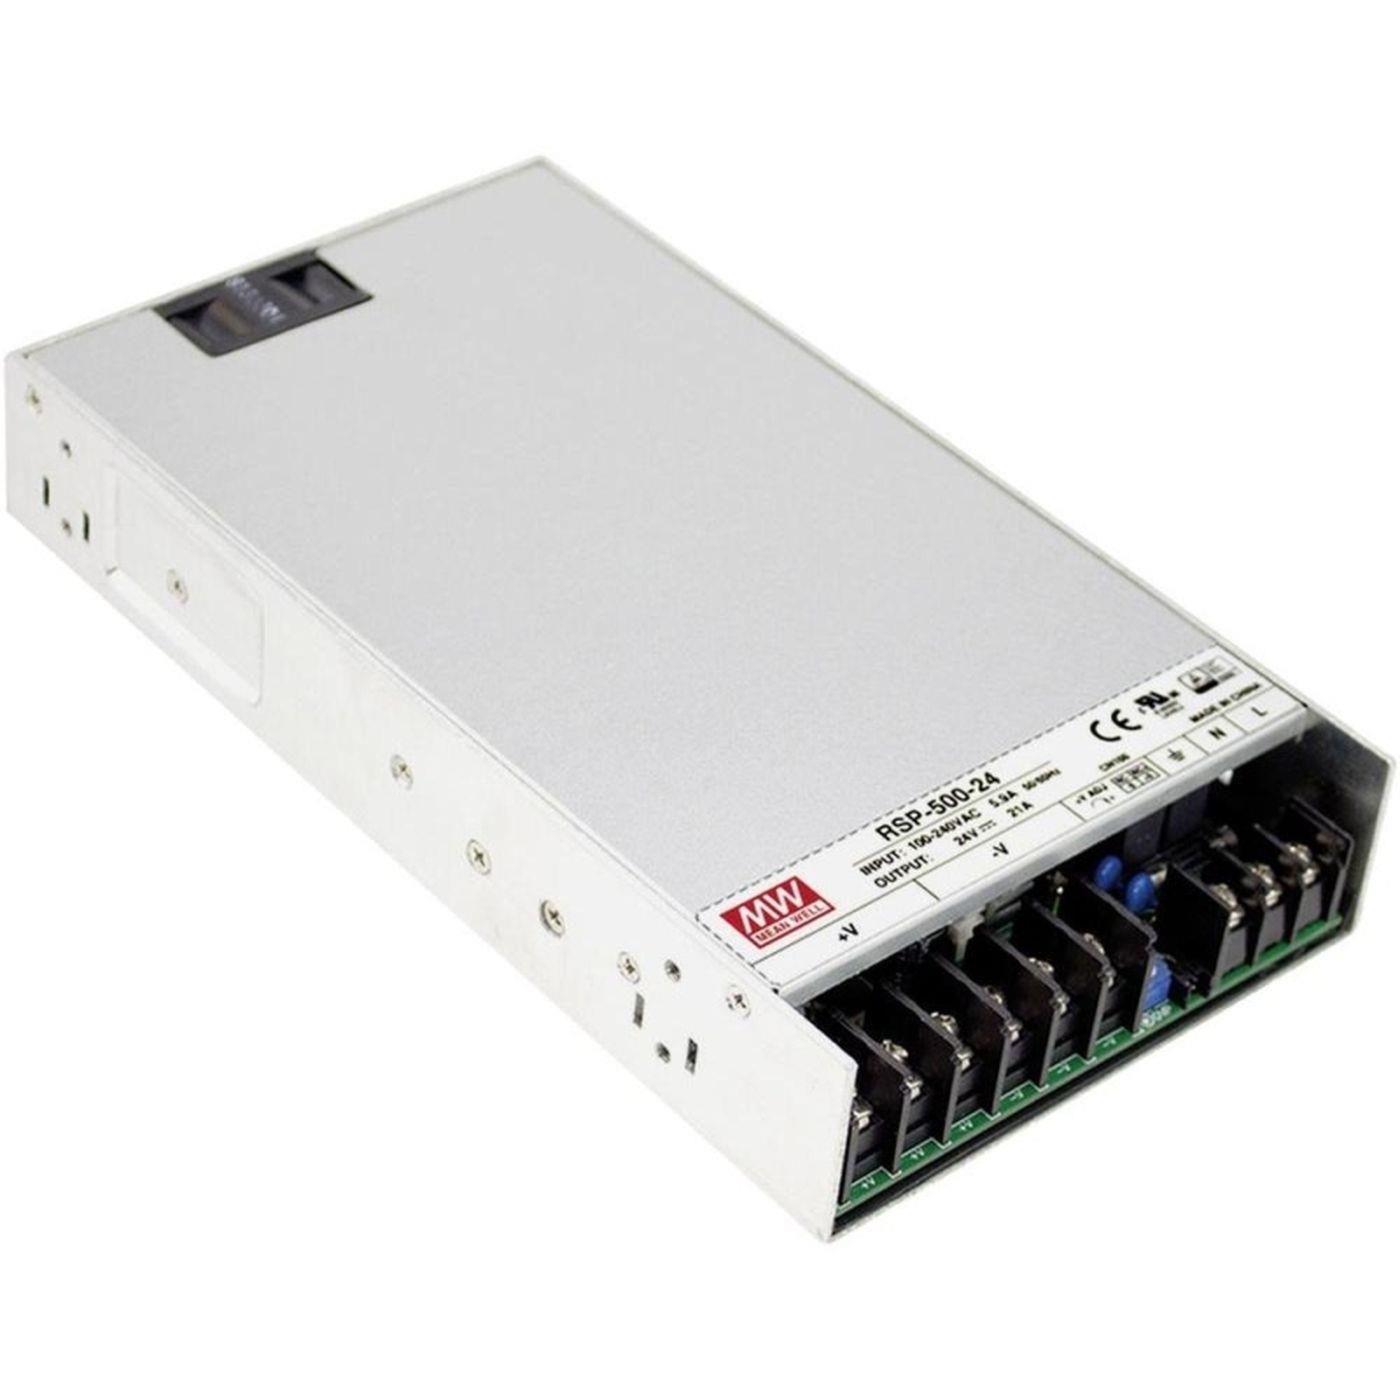 RSP-500-27 500W 27V 18,6A Industrial power supply